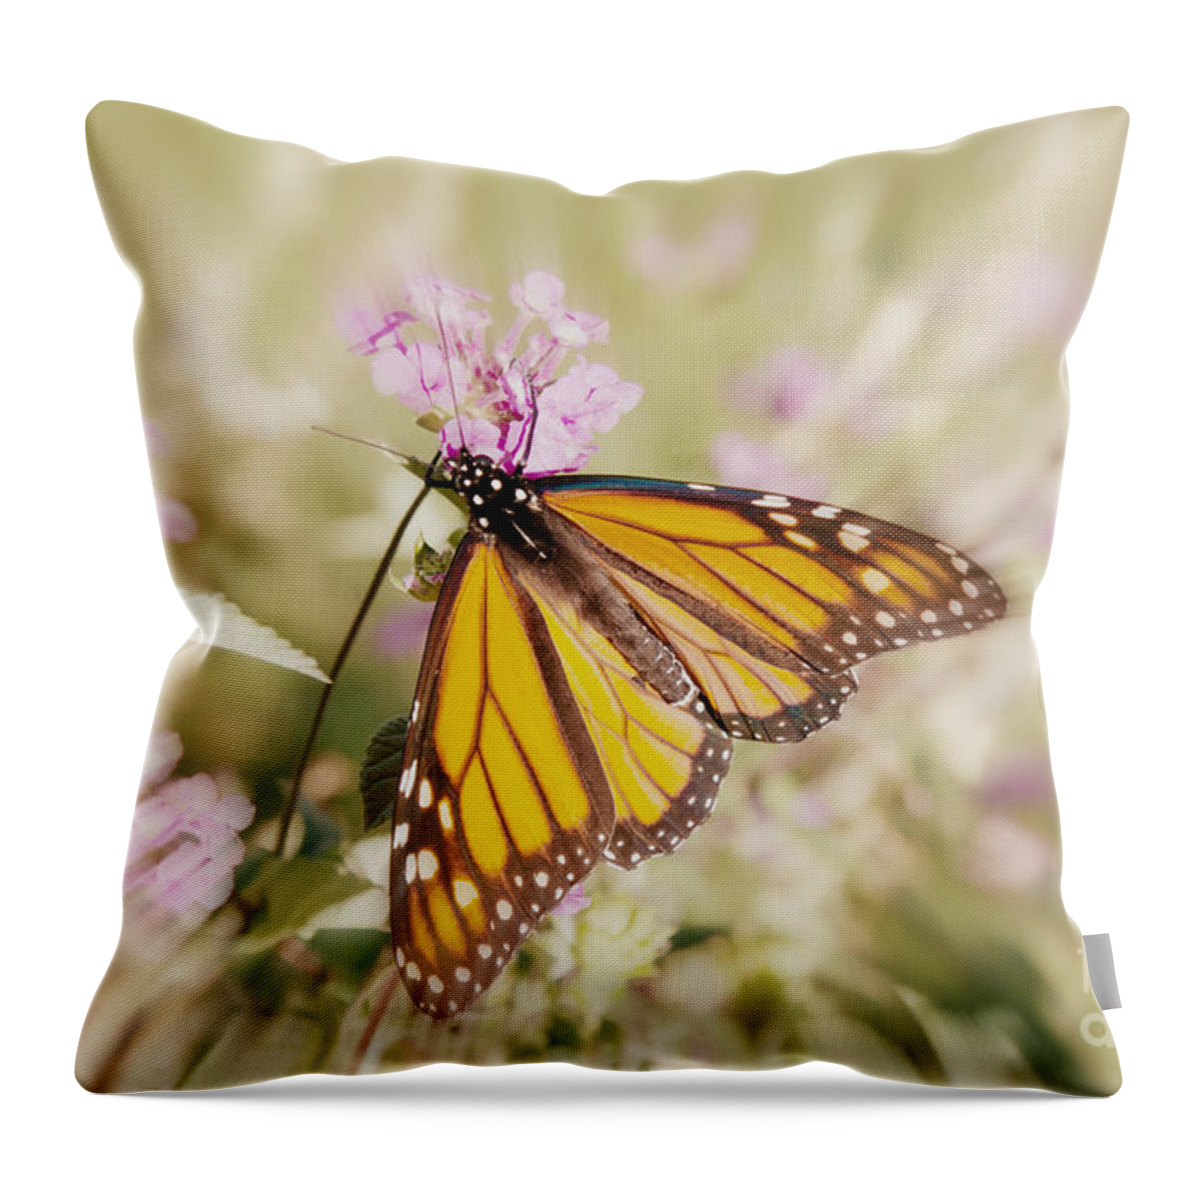 Butterfly Throw Pillow featuring the photograph Vanishing Species 3 by Chris Scroggins